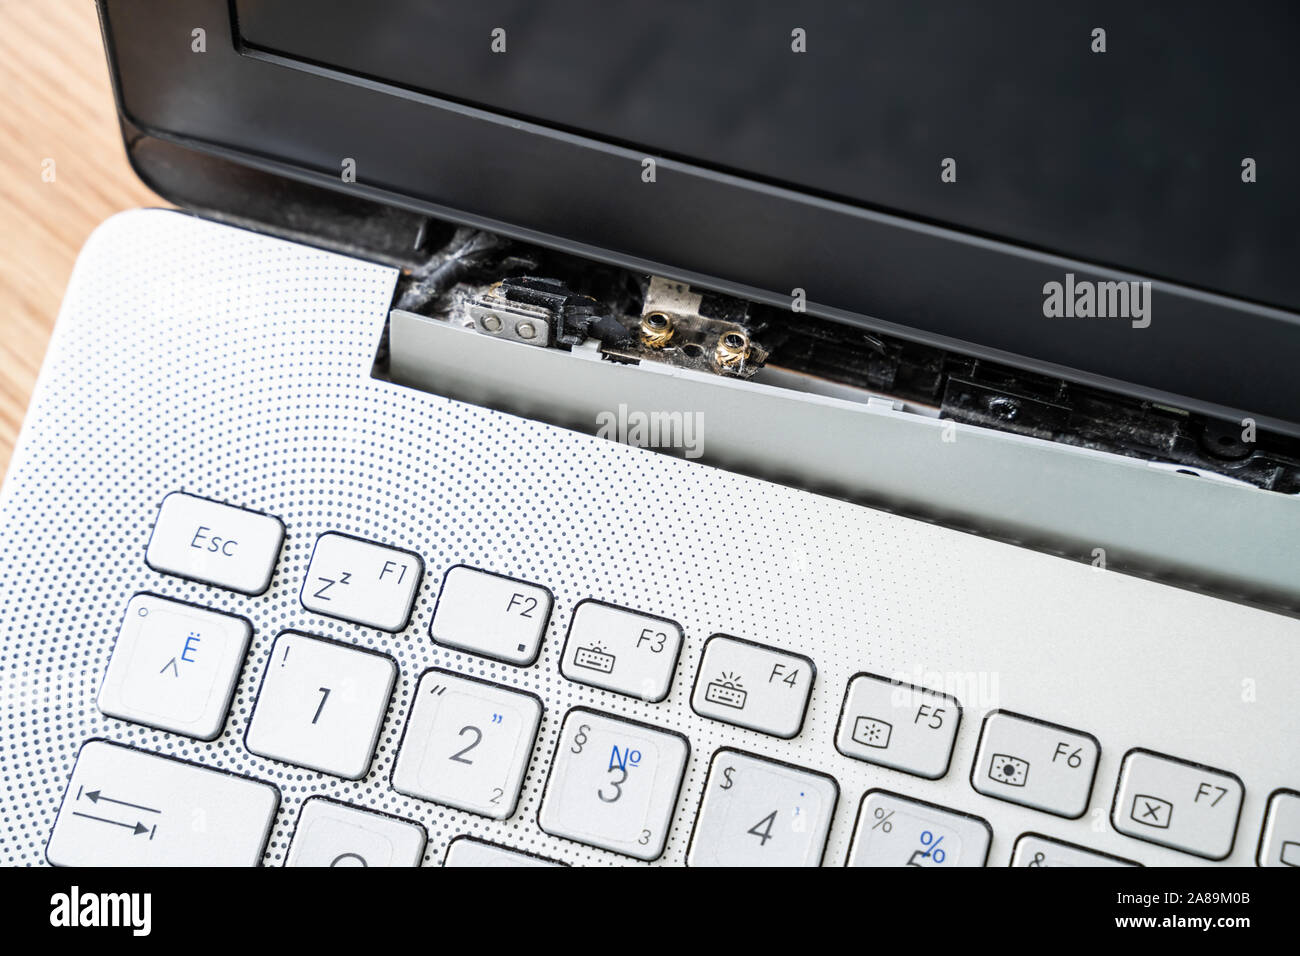 Damaged Laptop Computer With Broken Screen Attachment Stock Photo - Alamy